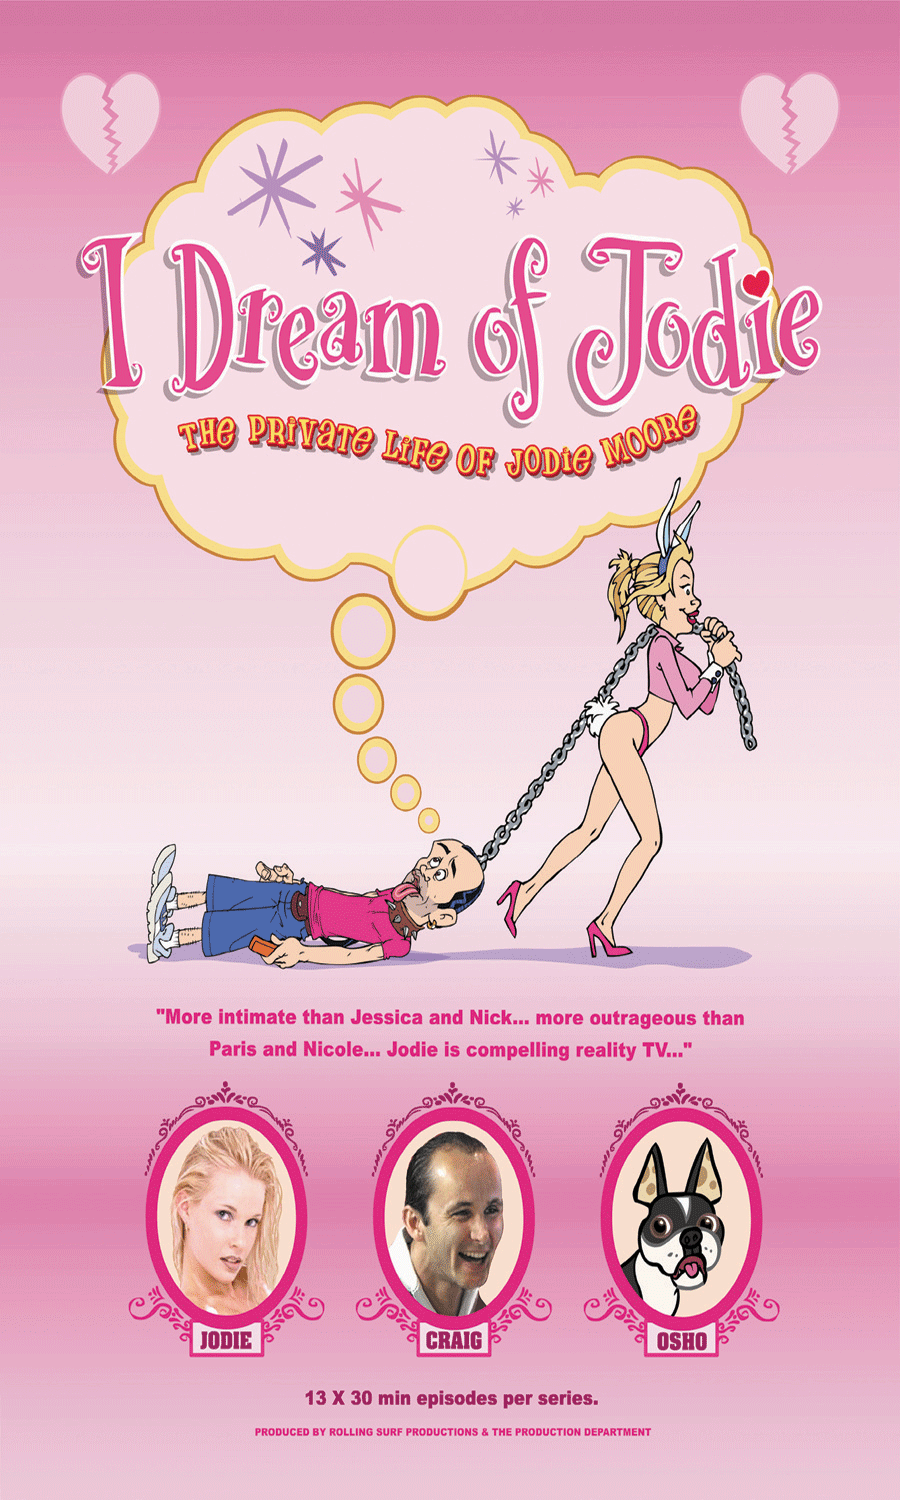 I Dream of Jodie: The Private Life of Jodie Moore